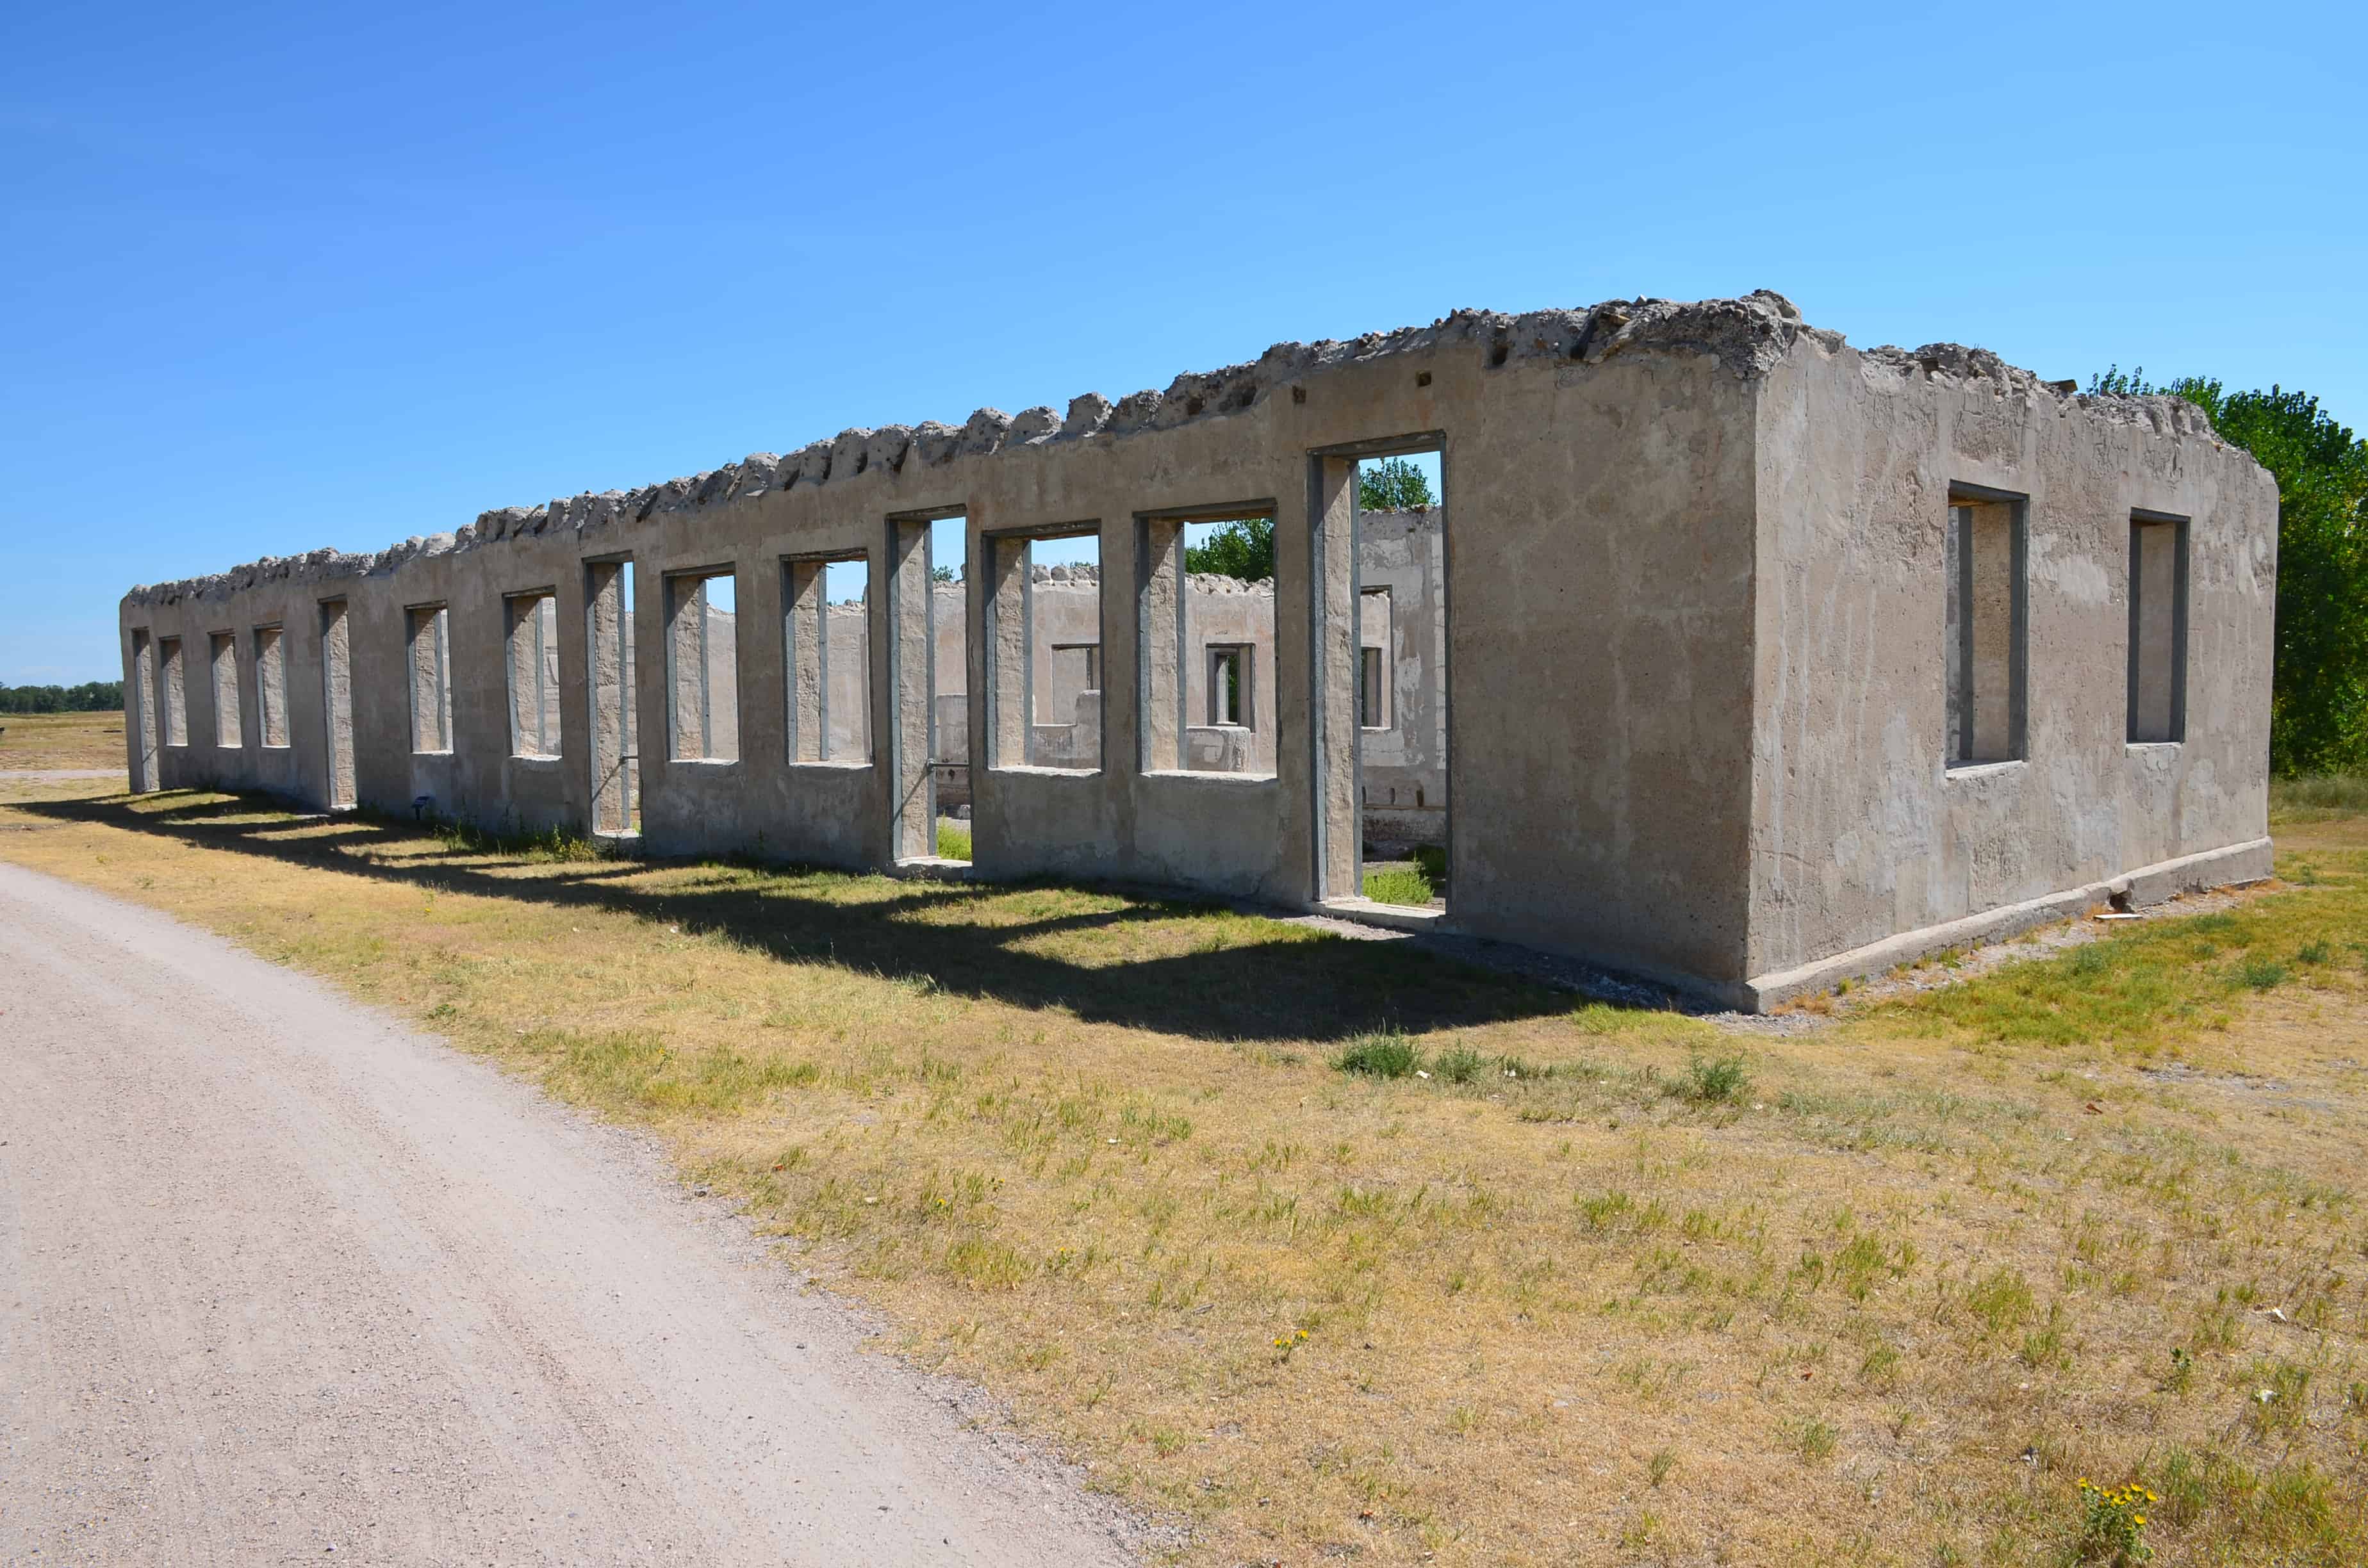 Administration building at Fort Laramie National Historic Site in Wyoming